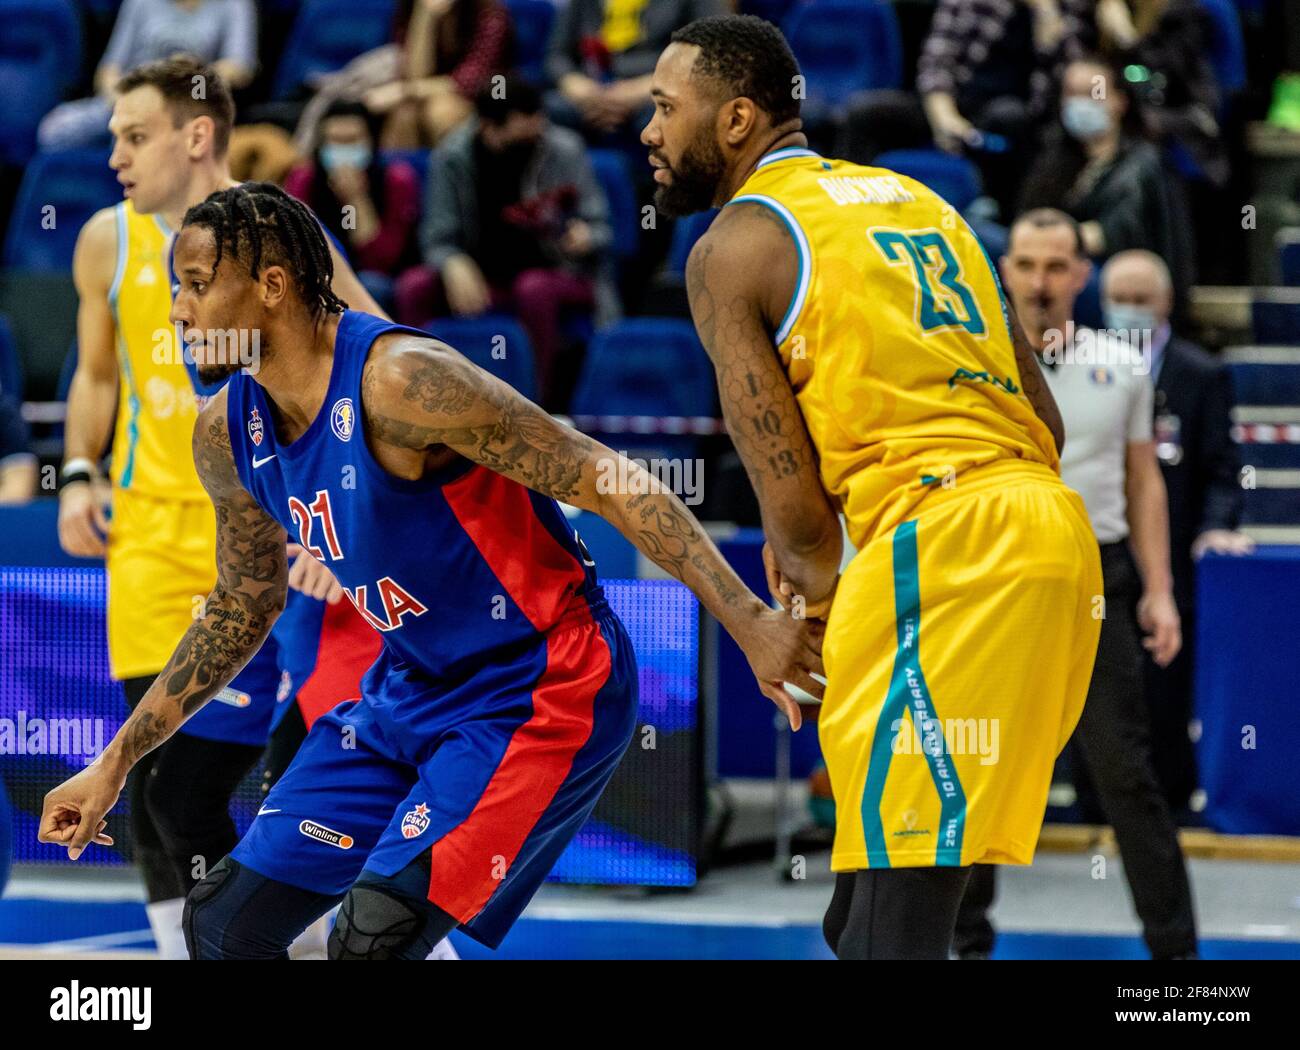 Moscow, Russia. 11th Apr, 2021. Will Clyburn, #21 of CSKA Moscow plays against Astana during the VTB United League 2020-2021 season at CSKA Arena. (Final Score; CSKA Moscow 100:77 Astana). (Photo by Nicholas Muller/SOPA Images/Sipa USA) Credit: Sipa USA/Alamy Live News Stock Photo